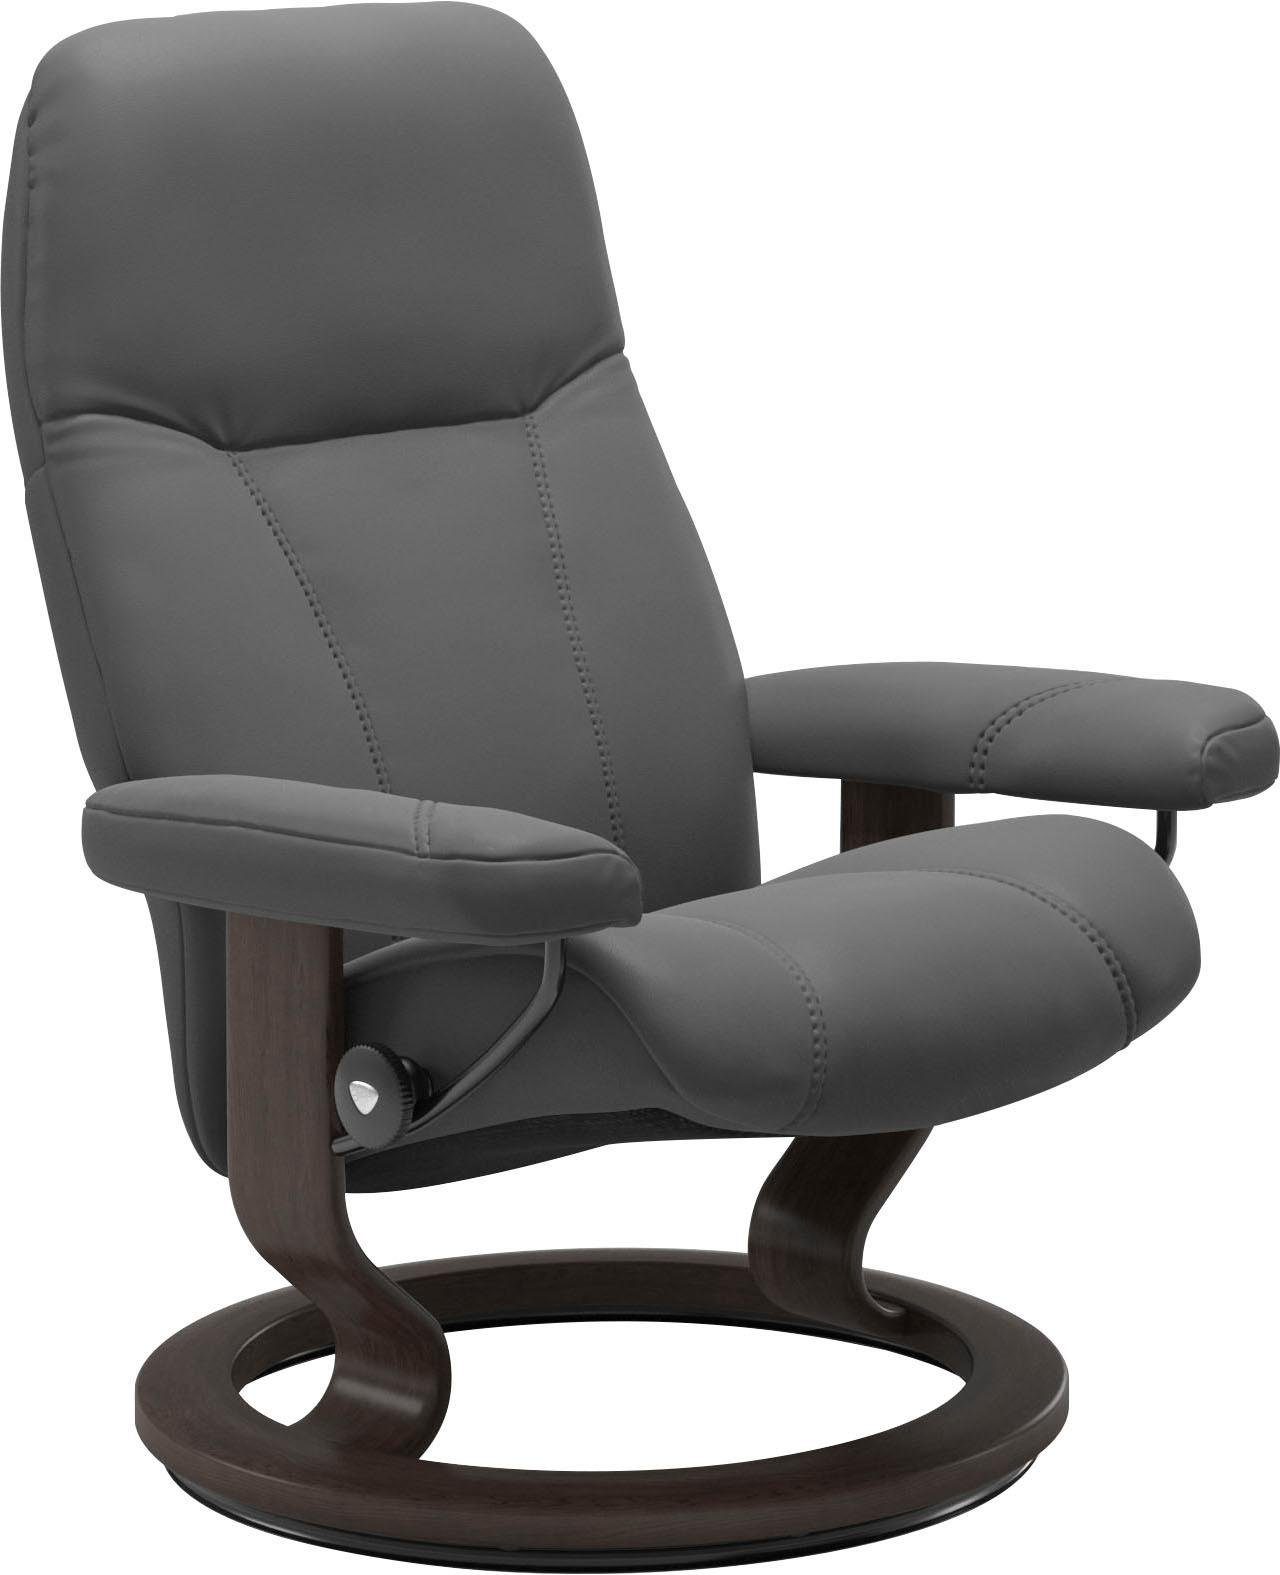 mit Base, Relaxsessel Stressless® Consul, Größe S, Classic Wenge Gestell